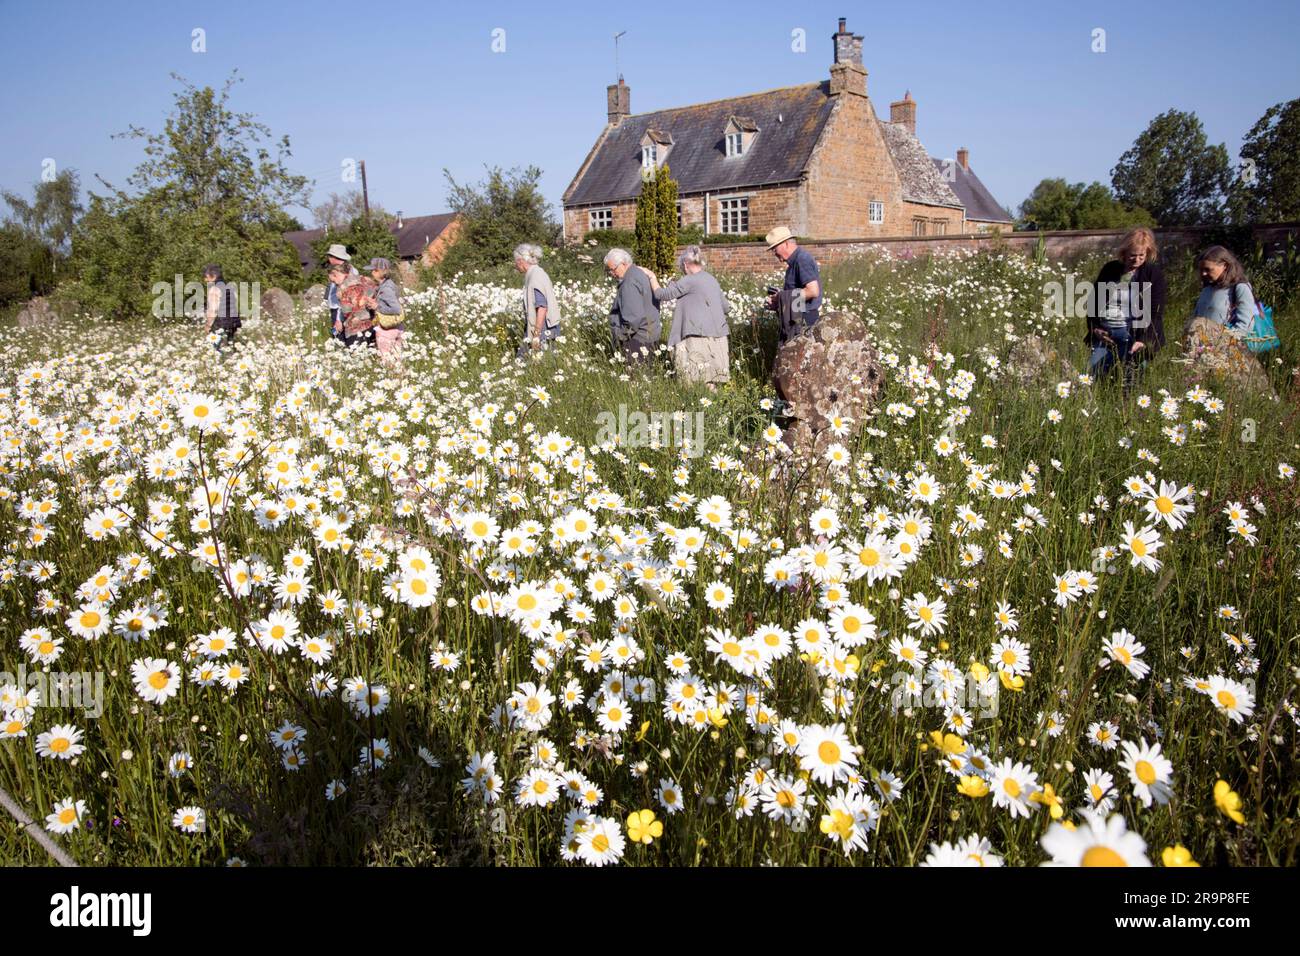 Wildflowers in full bloom in churchyard  St. Lawrence Church Oxhill Warks UK Stock Photo